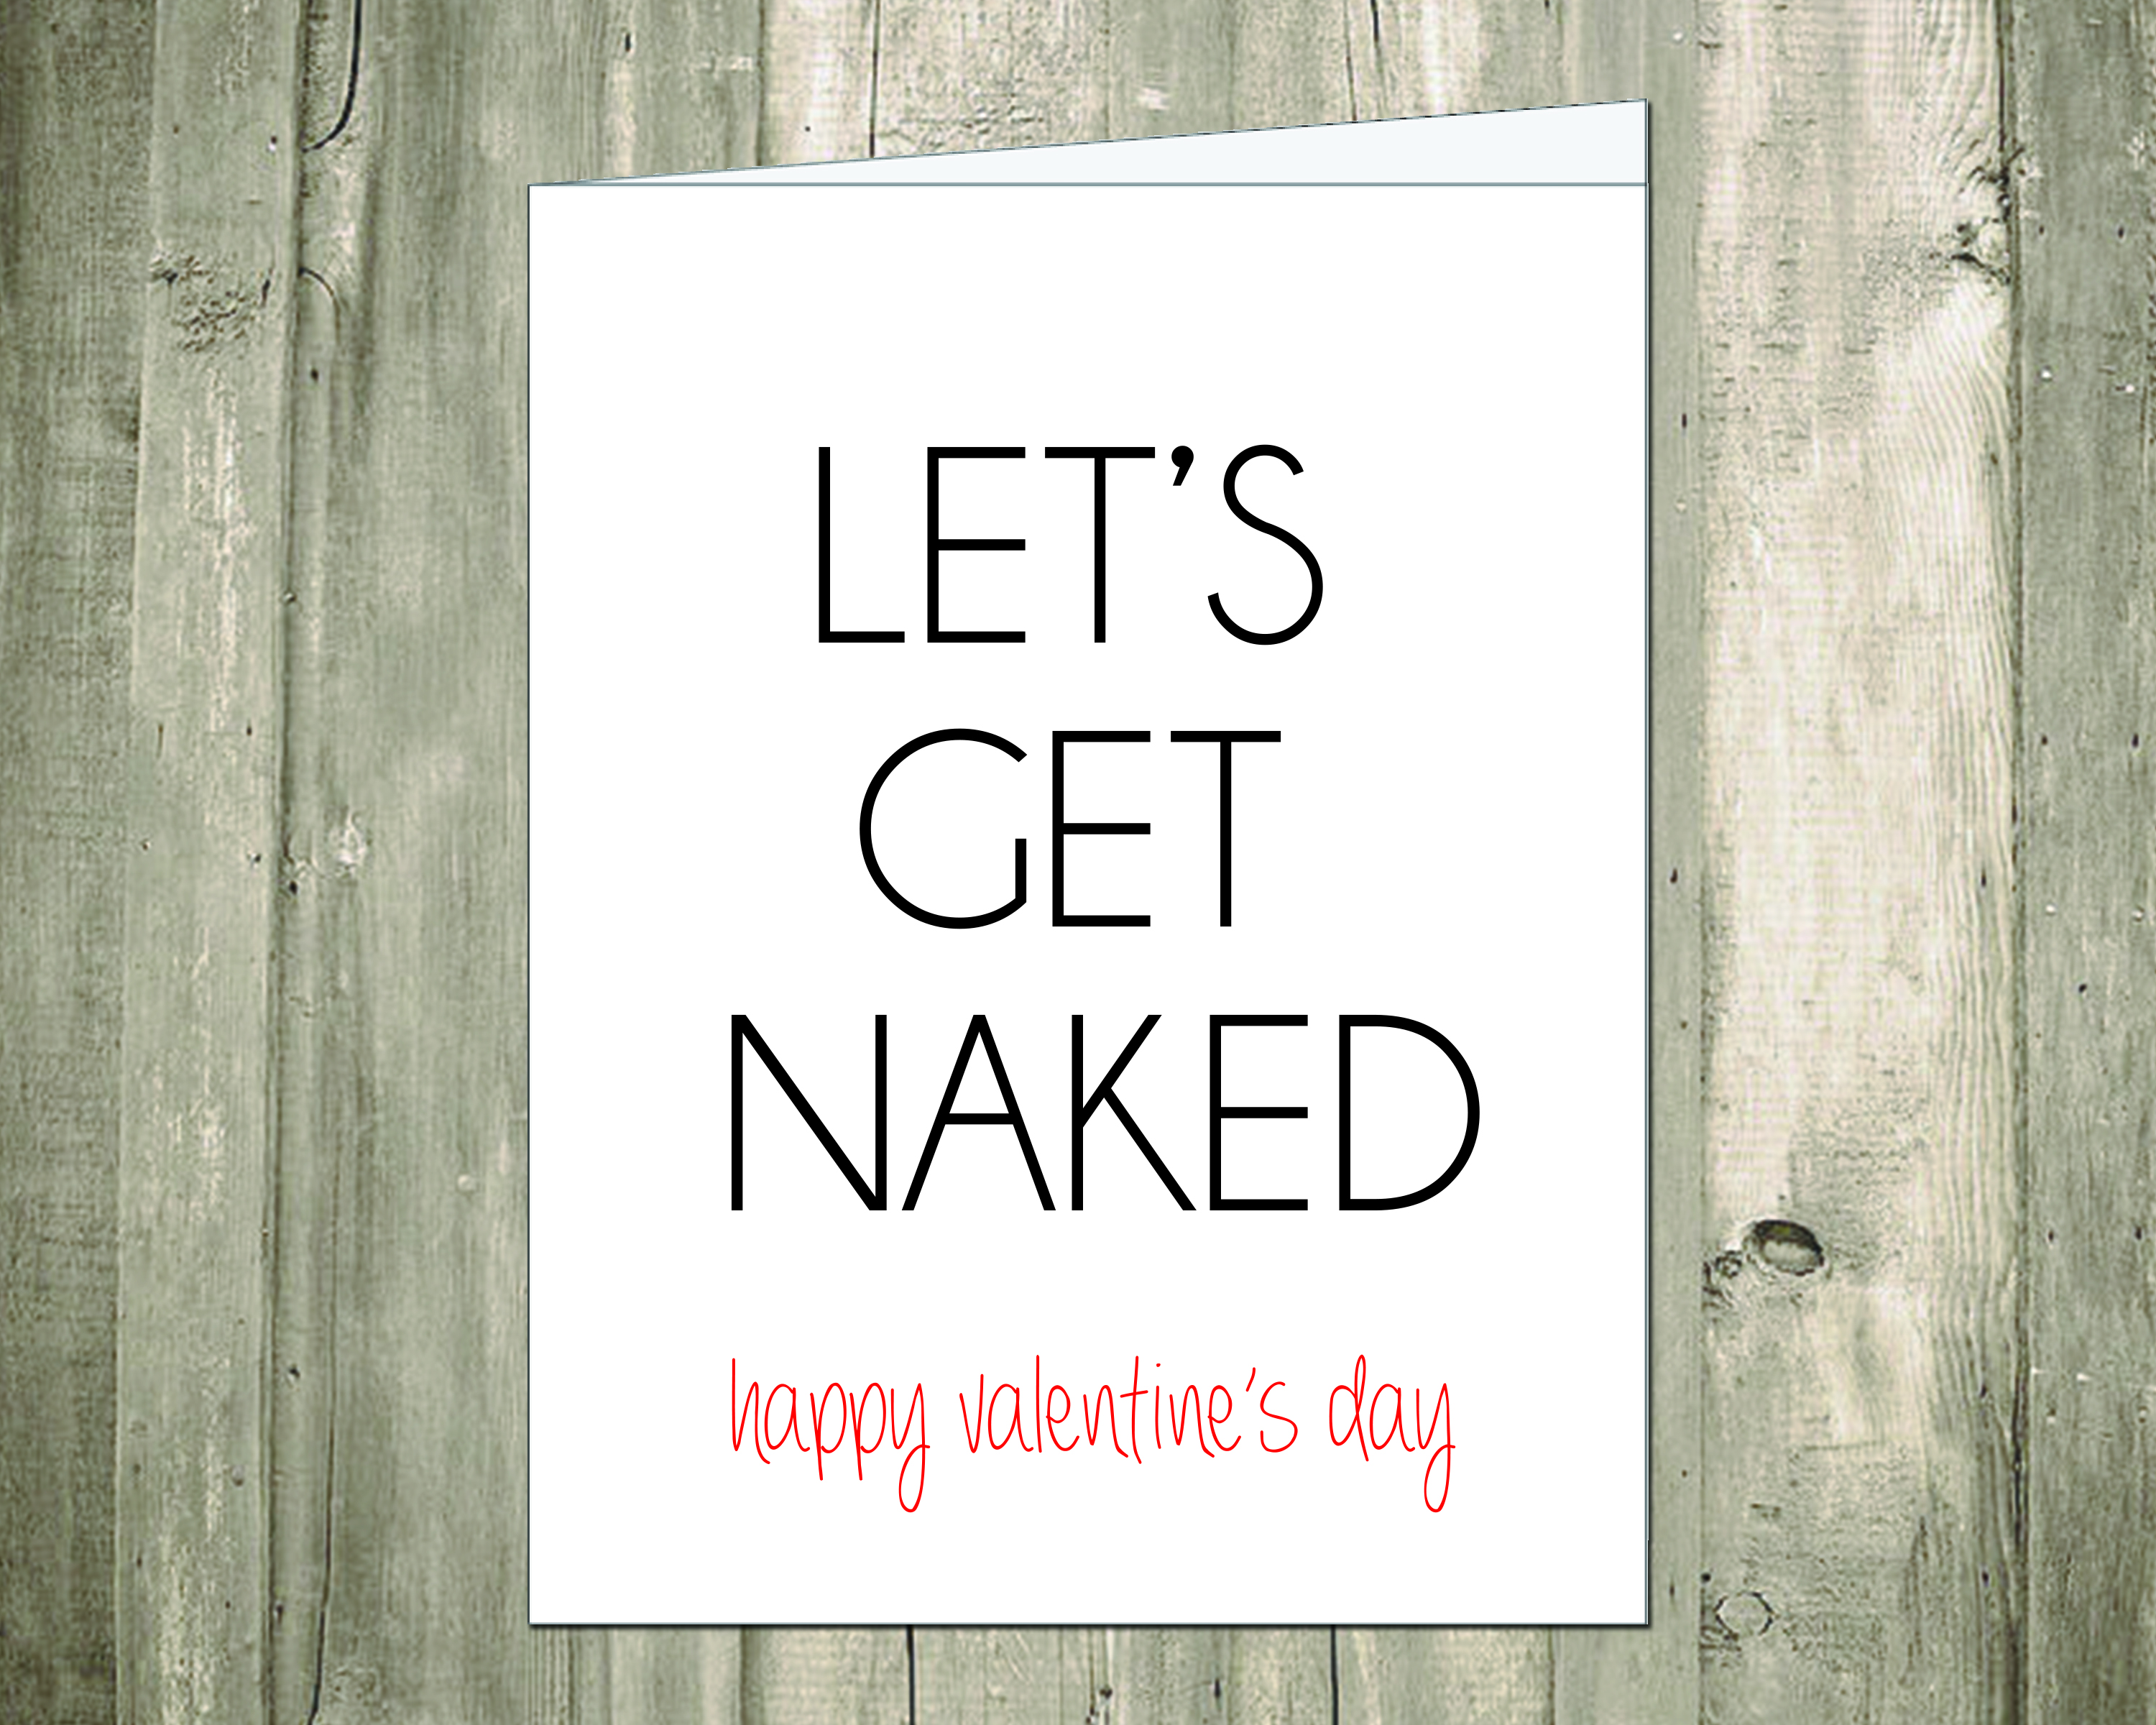 Lets Get Naked (Happy Valentine’s Day)